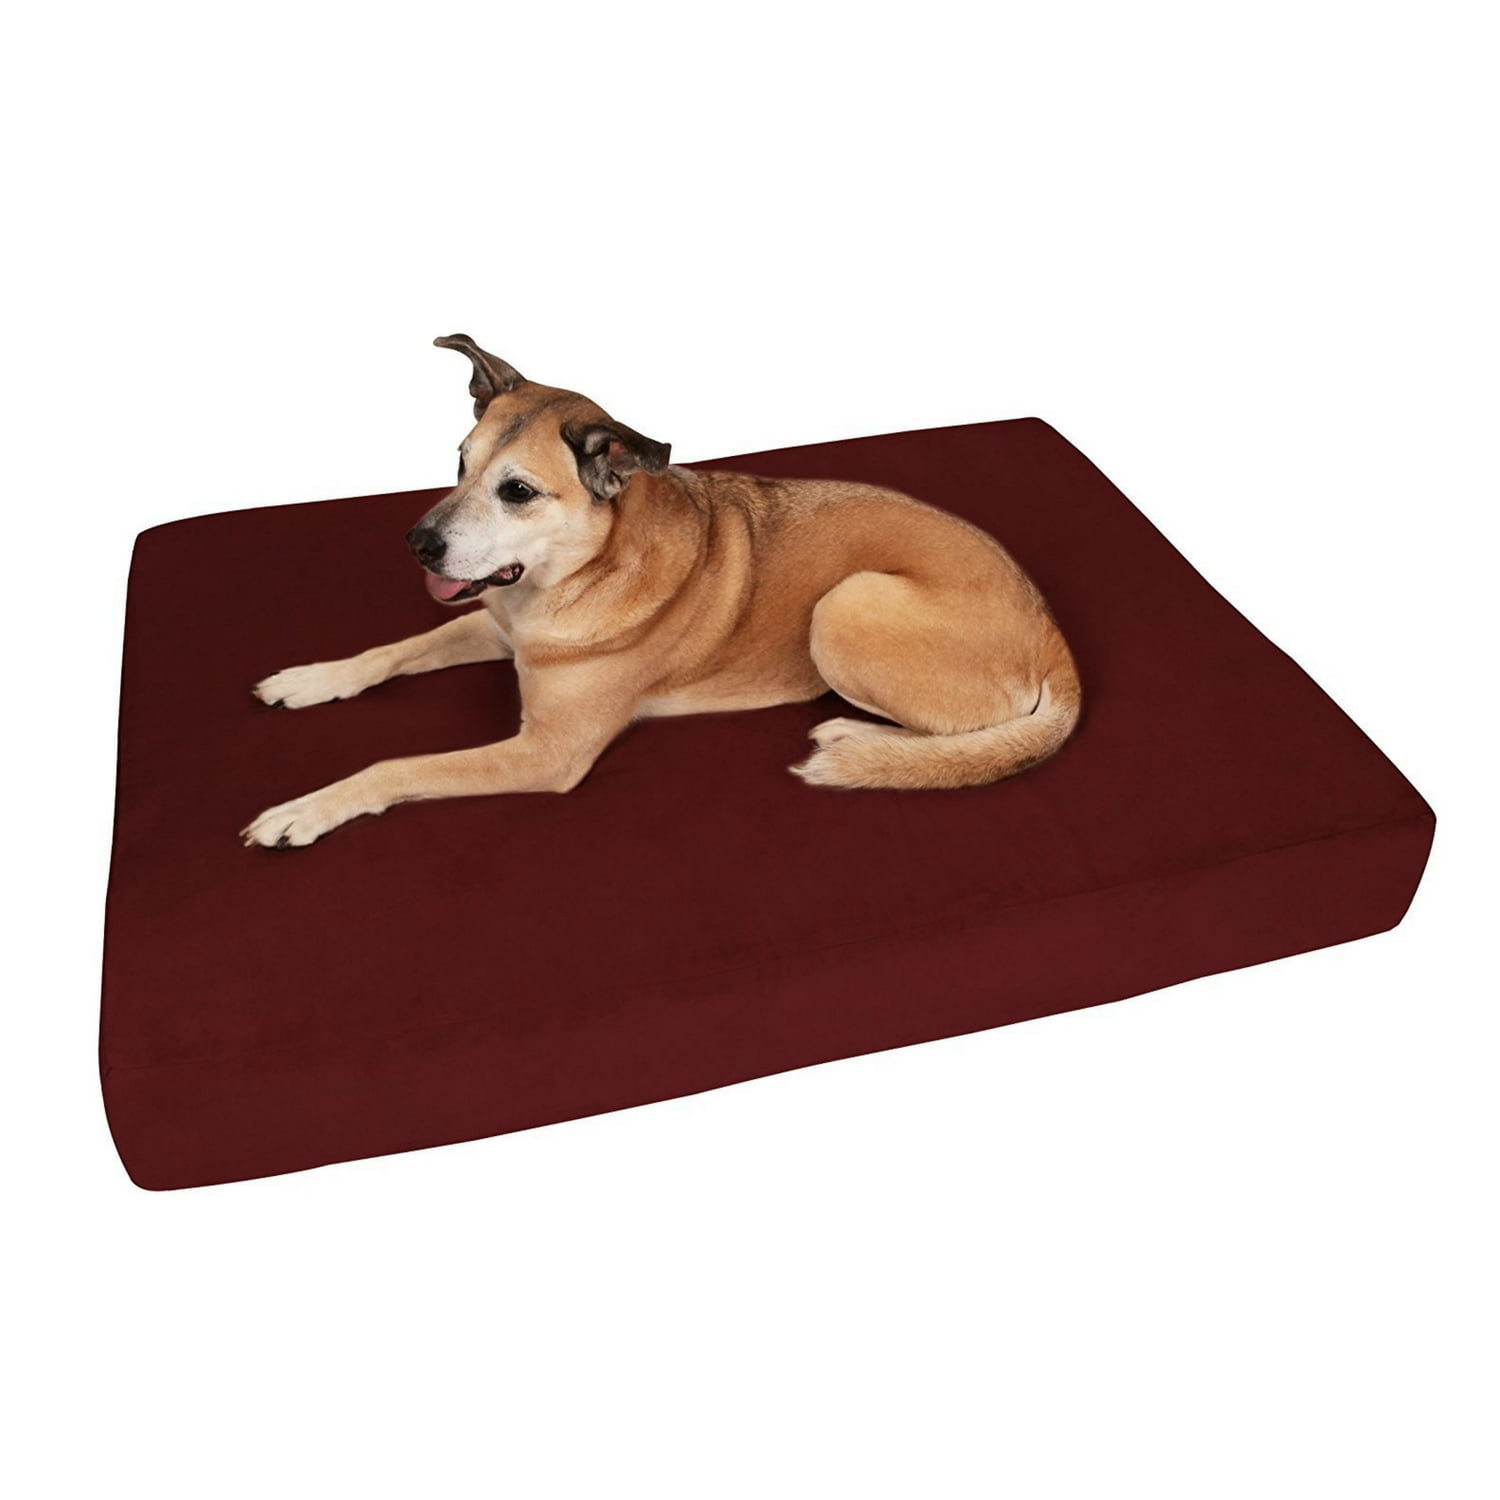 Big Barker 7" Pillow Top Orthopedic Dog Bed for Large and Extra Large